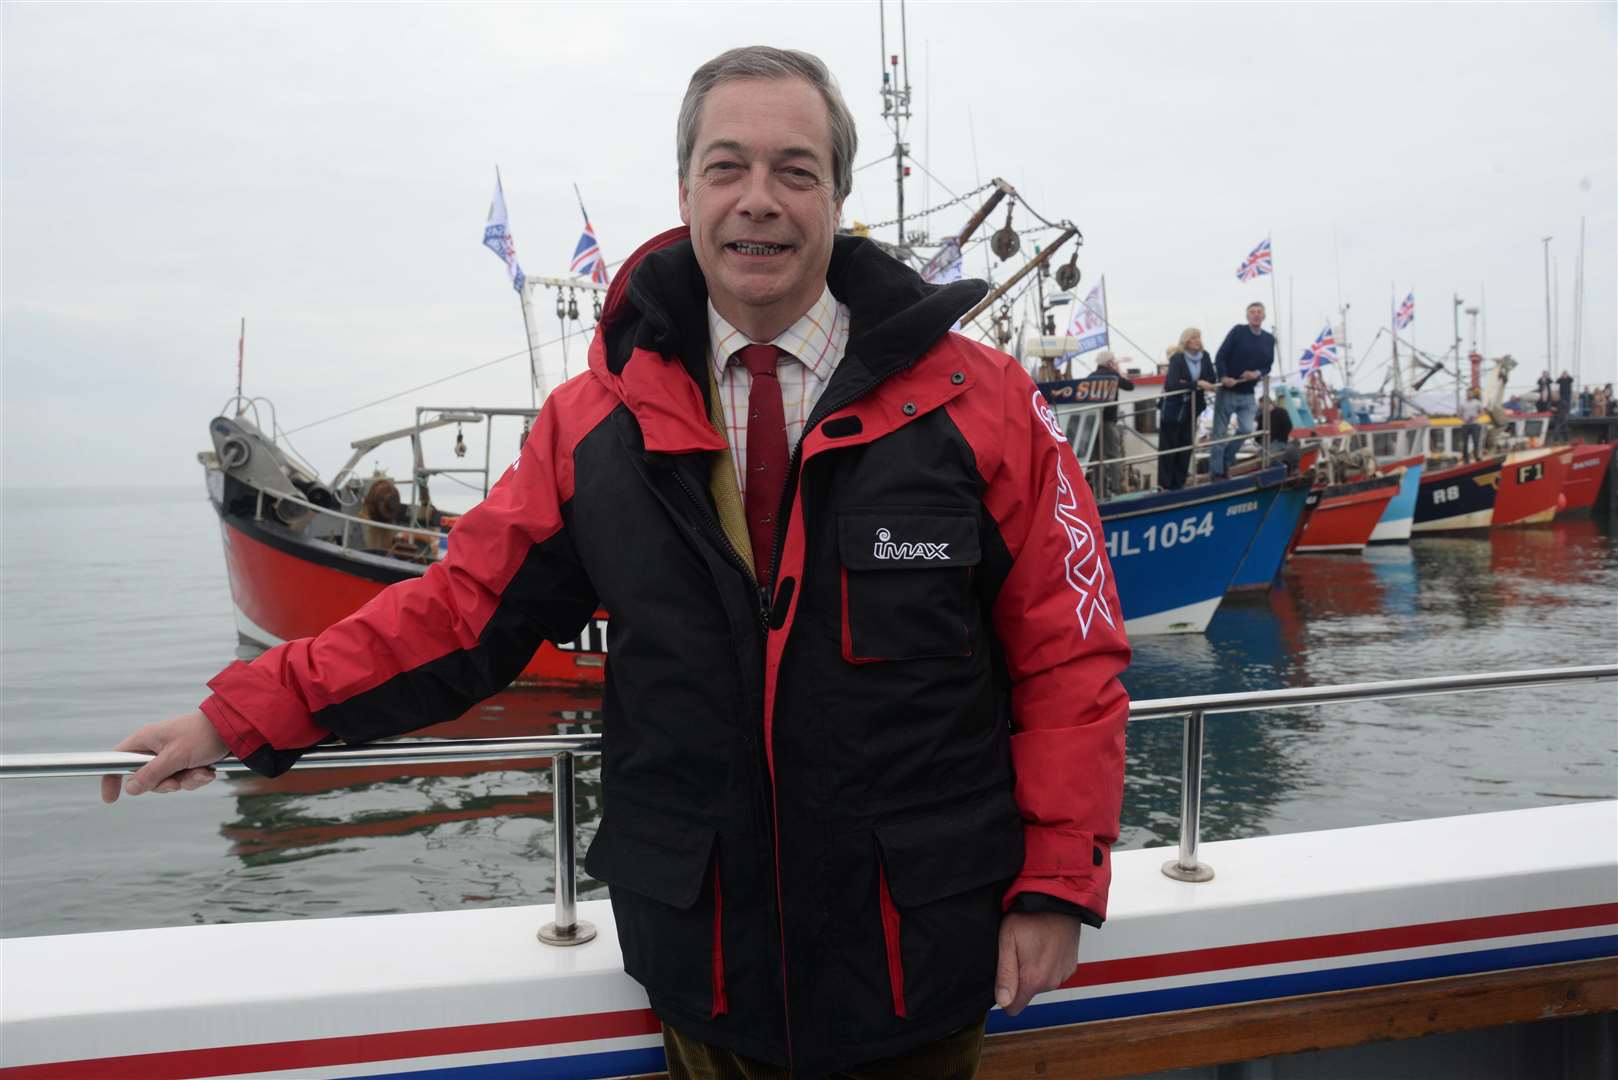 Nigel Farage at the protest in Whitstable (1418417)